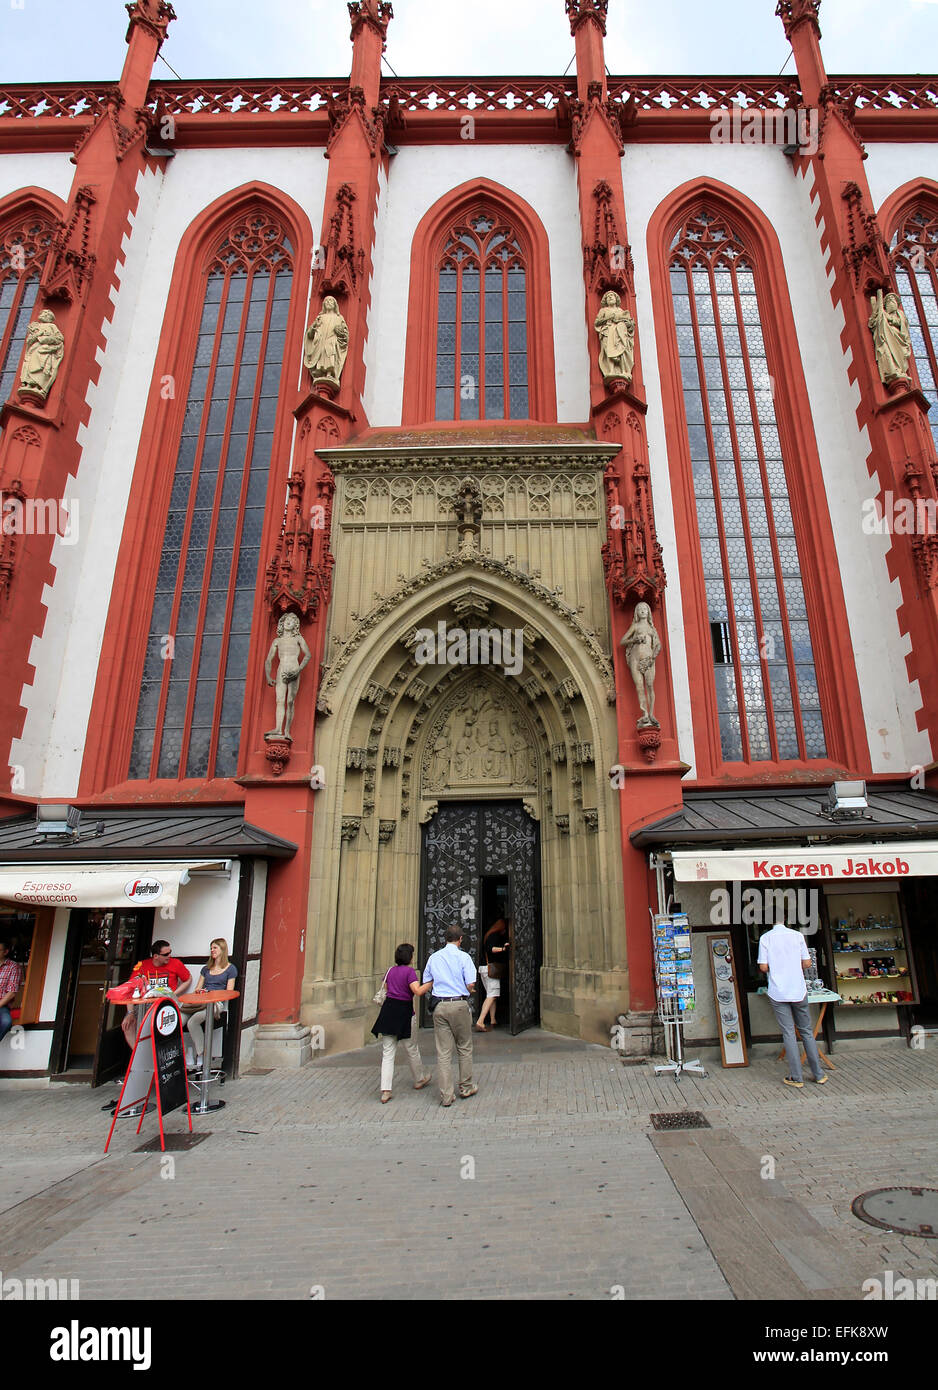 The Chapel of St. Mary is a gothic church on the Lower Market, which was built on the remains of a Jewish synagogue. Construction began in 1377. Construction time was about 100 years. Photo: Klaus Nowottnick Date: August 11, 2012 Stock Photo